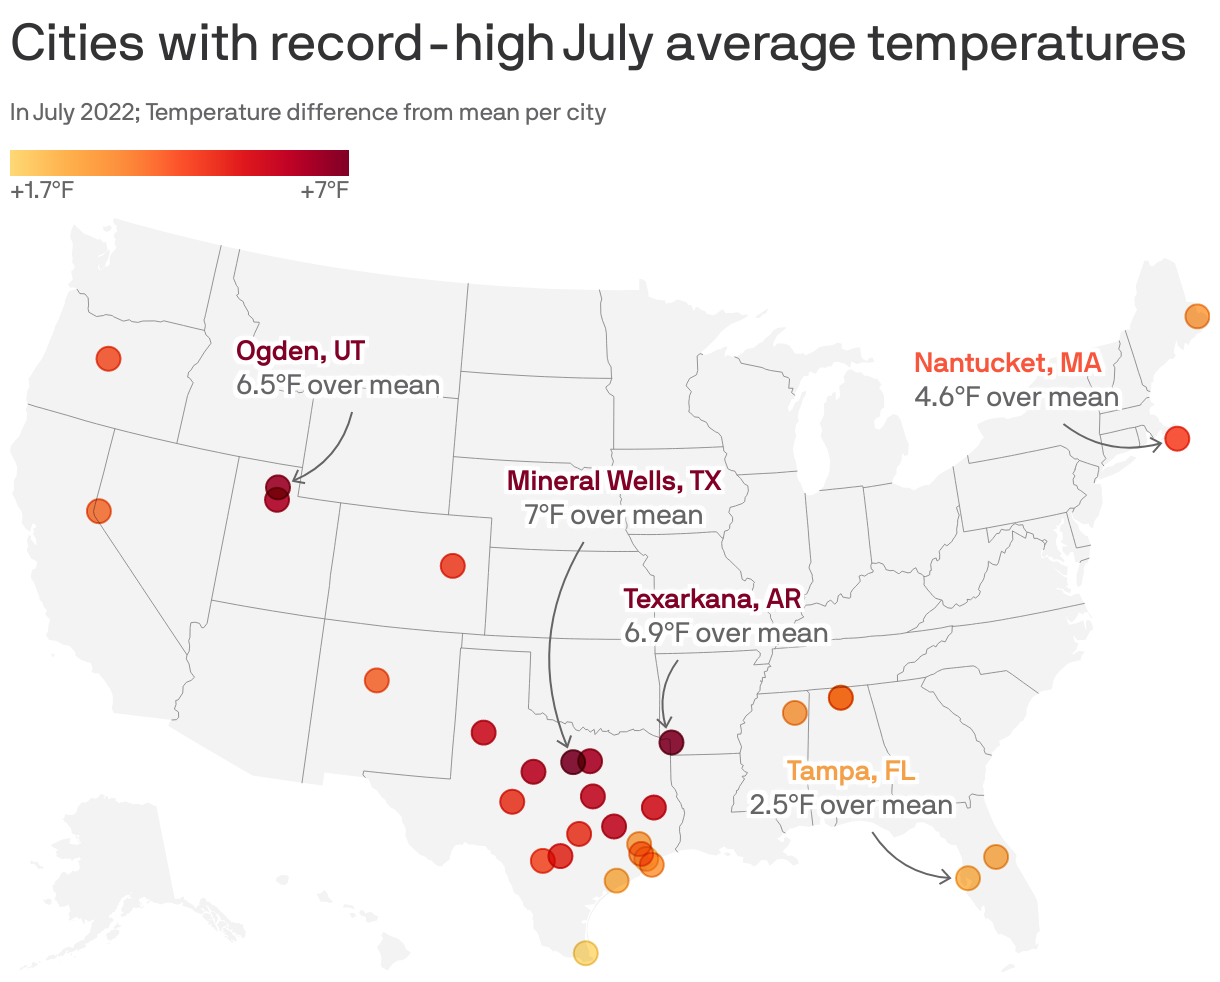 Cities with record-high July average temperatures